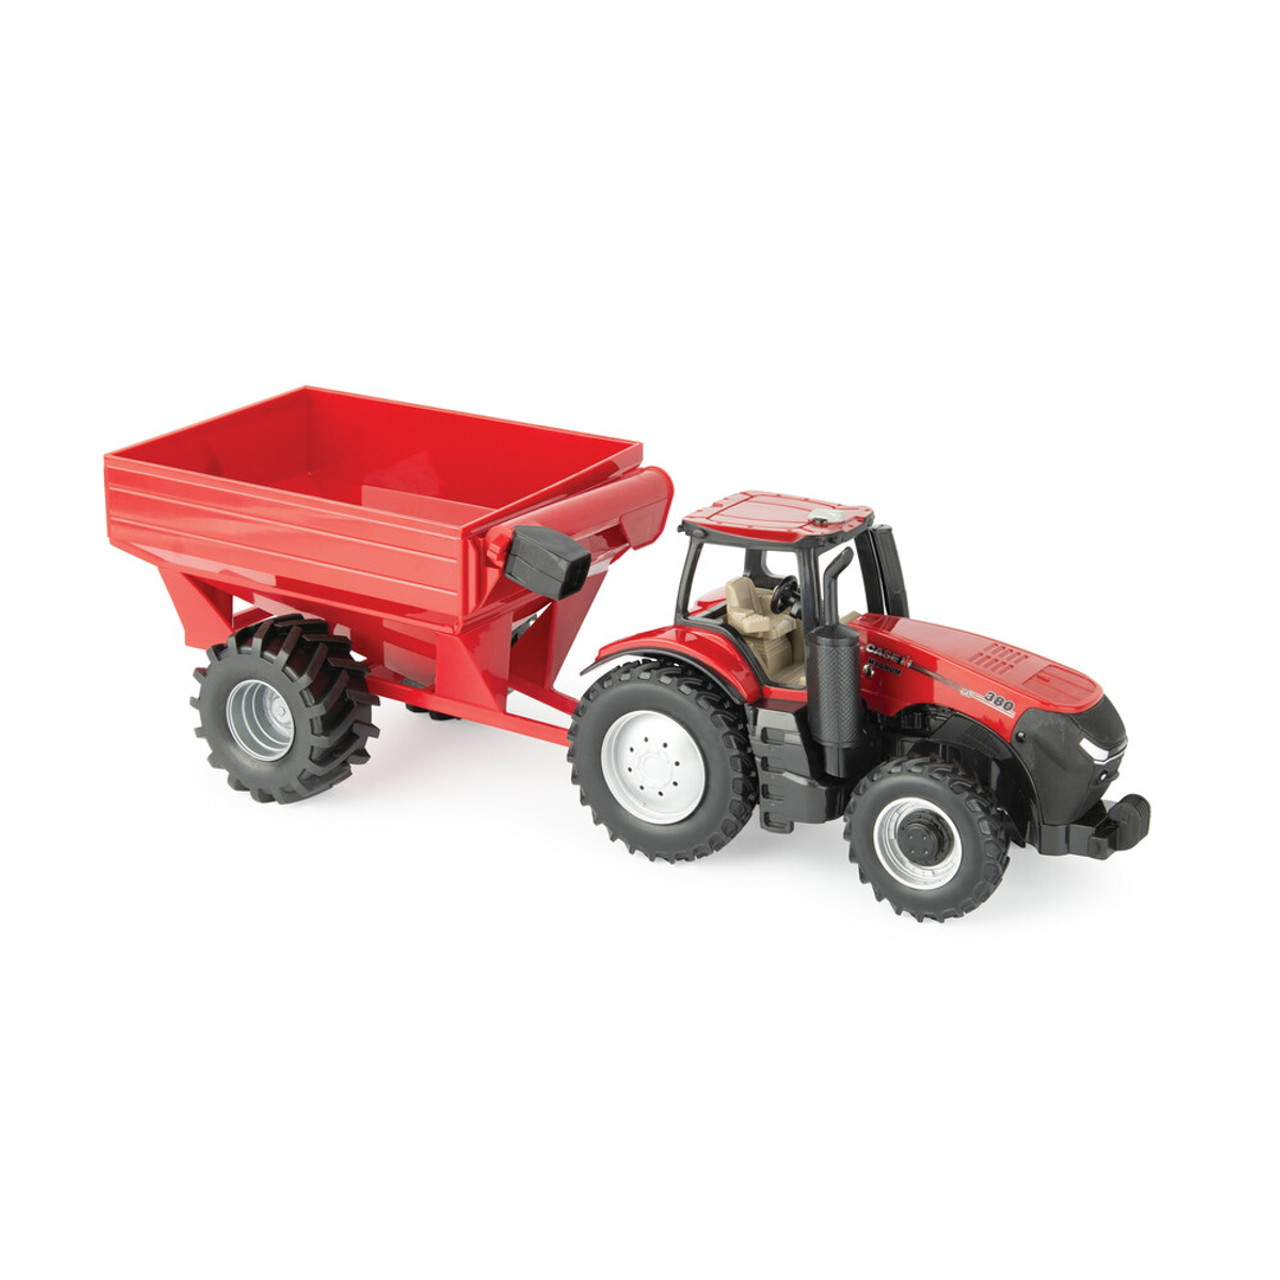 Case IH 1:32 Scale Farm Toy Harvesting Set with Tractor, Grain Cart and  Combine